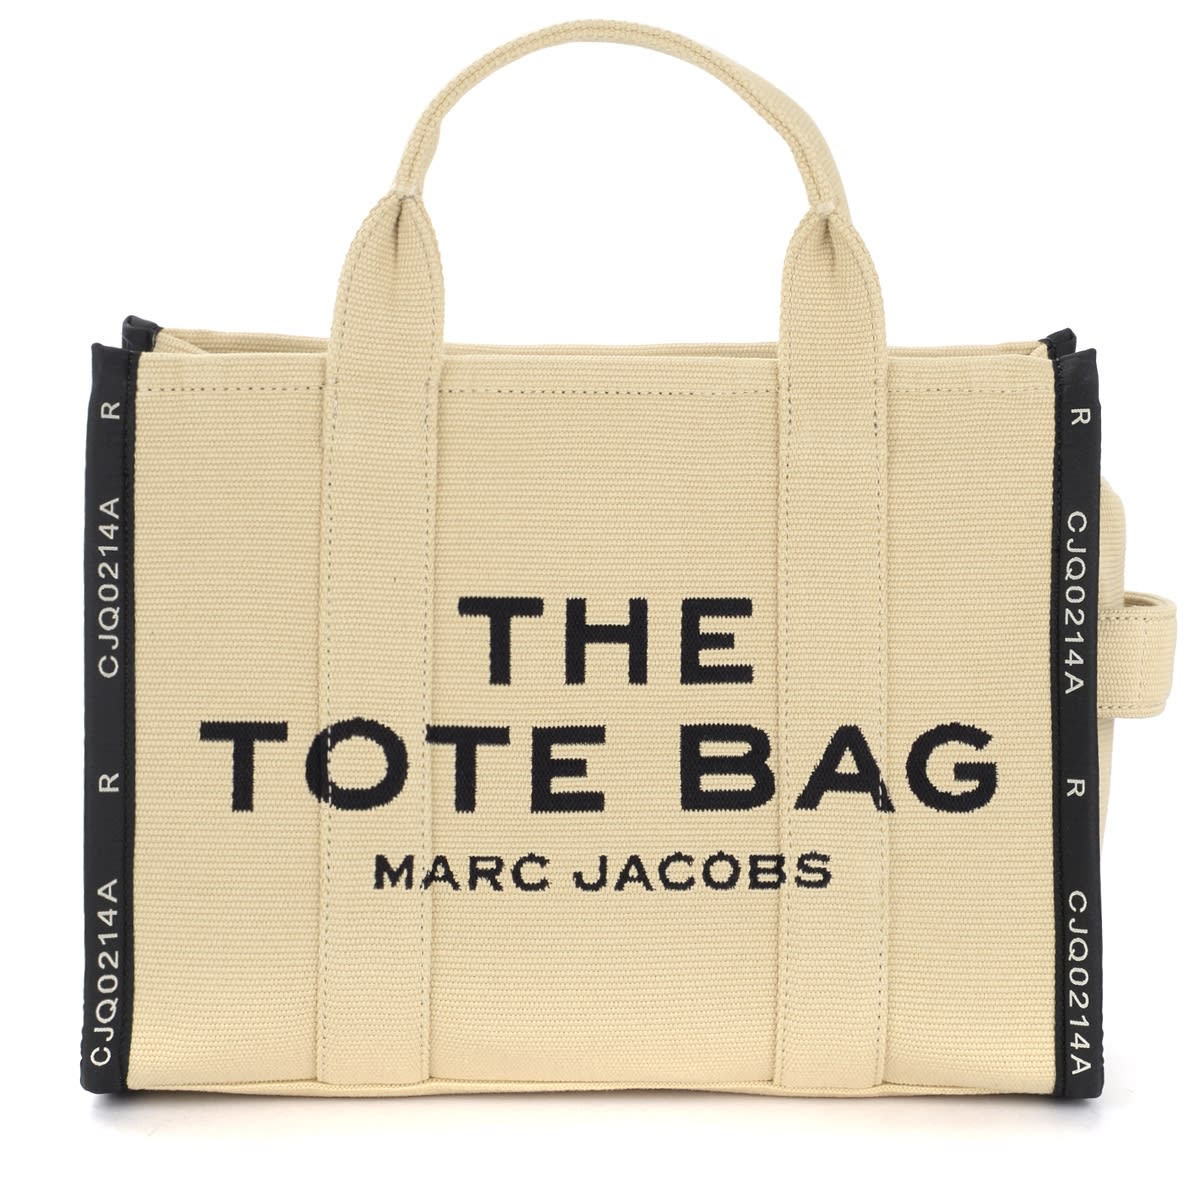 The Marc Jacobs The Jacquard Small Tote Bag Sand Color